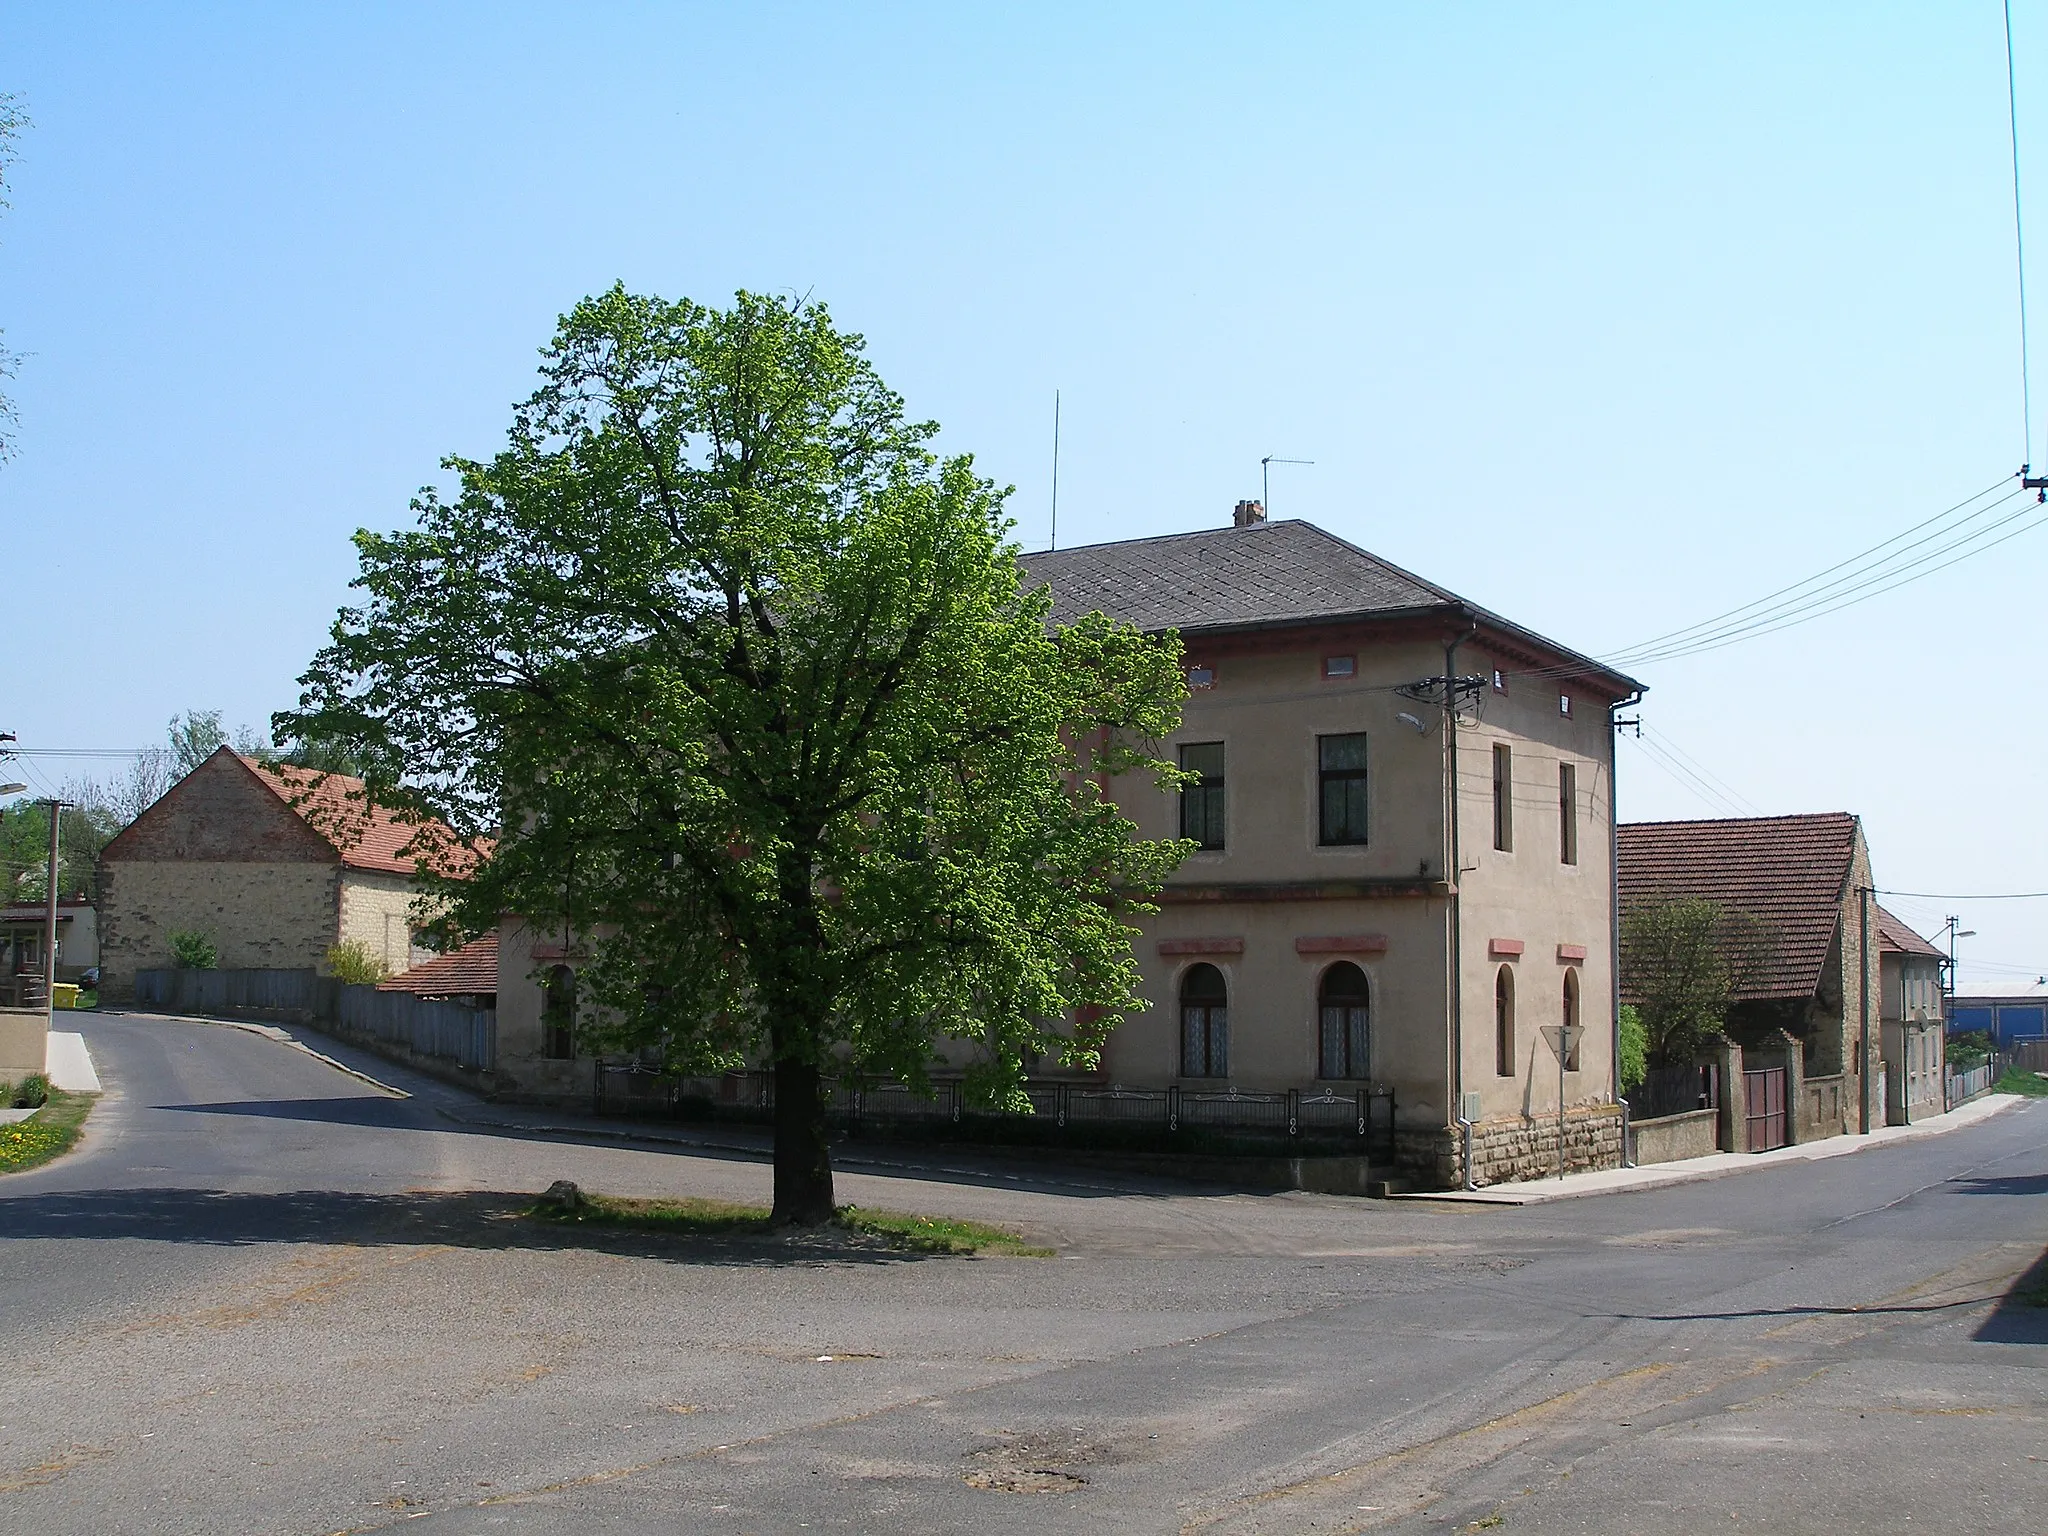 Photo showing: The tree at the crossroads in Libkovice pod Řípem.